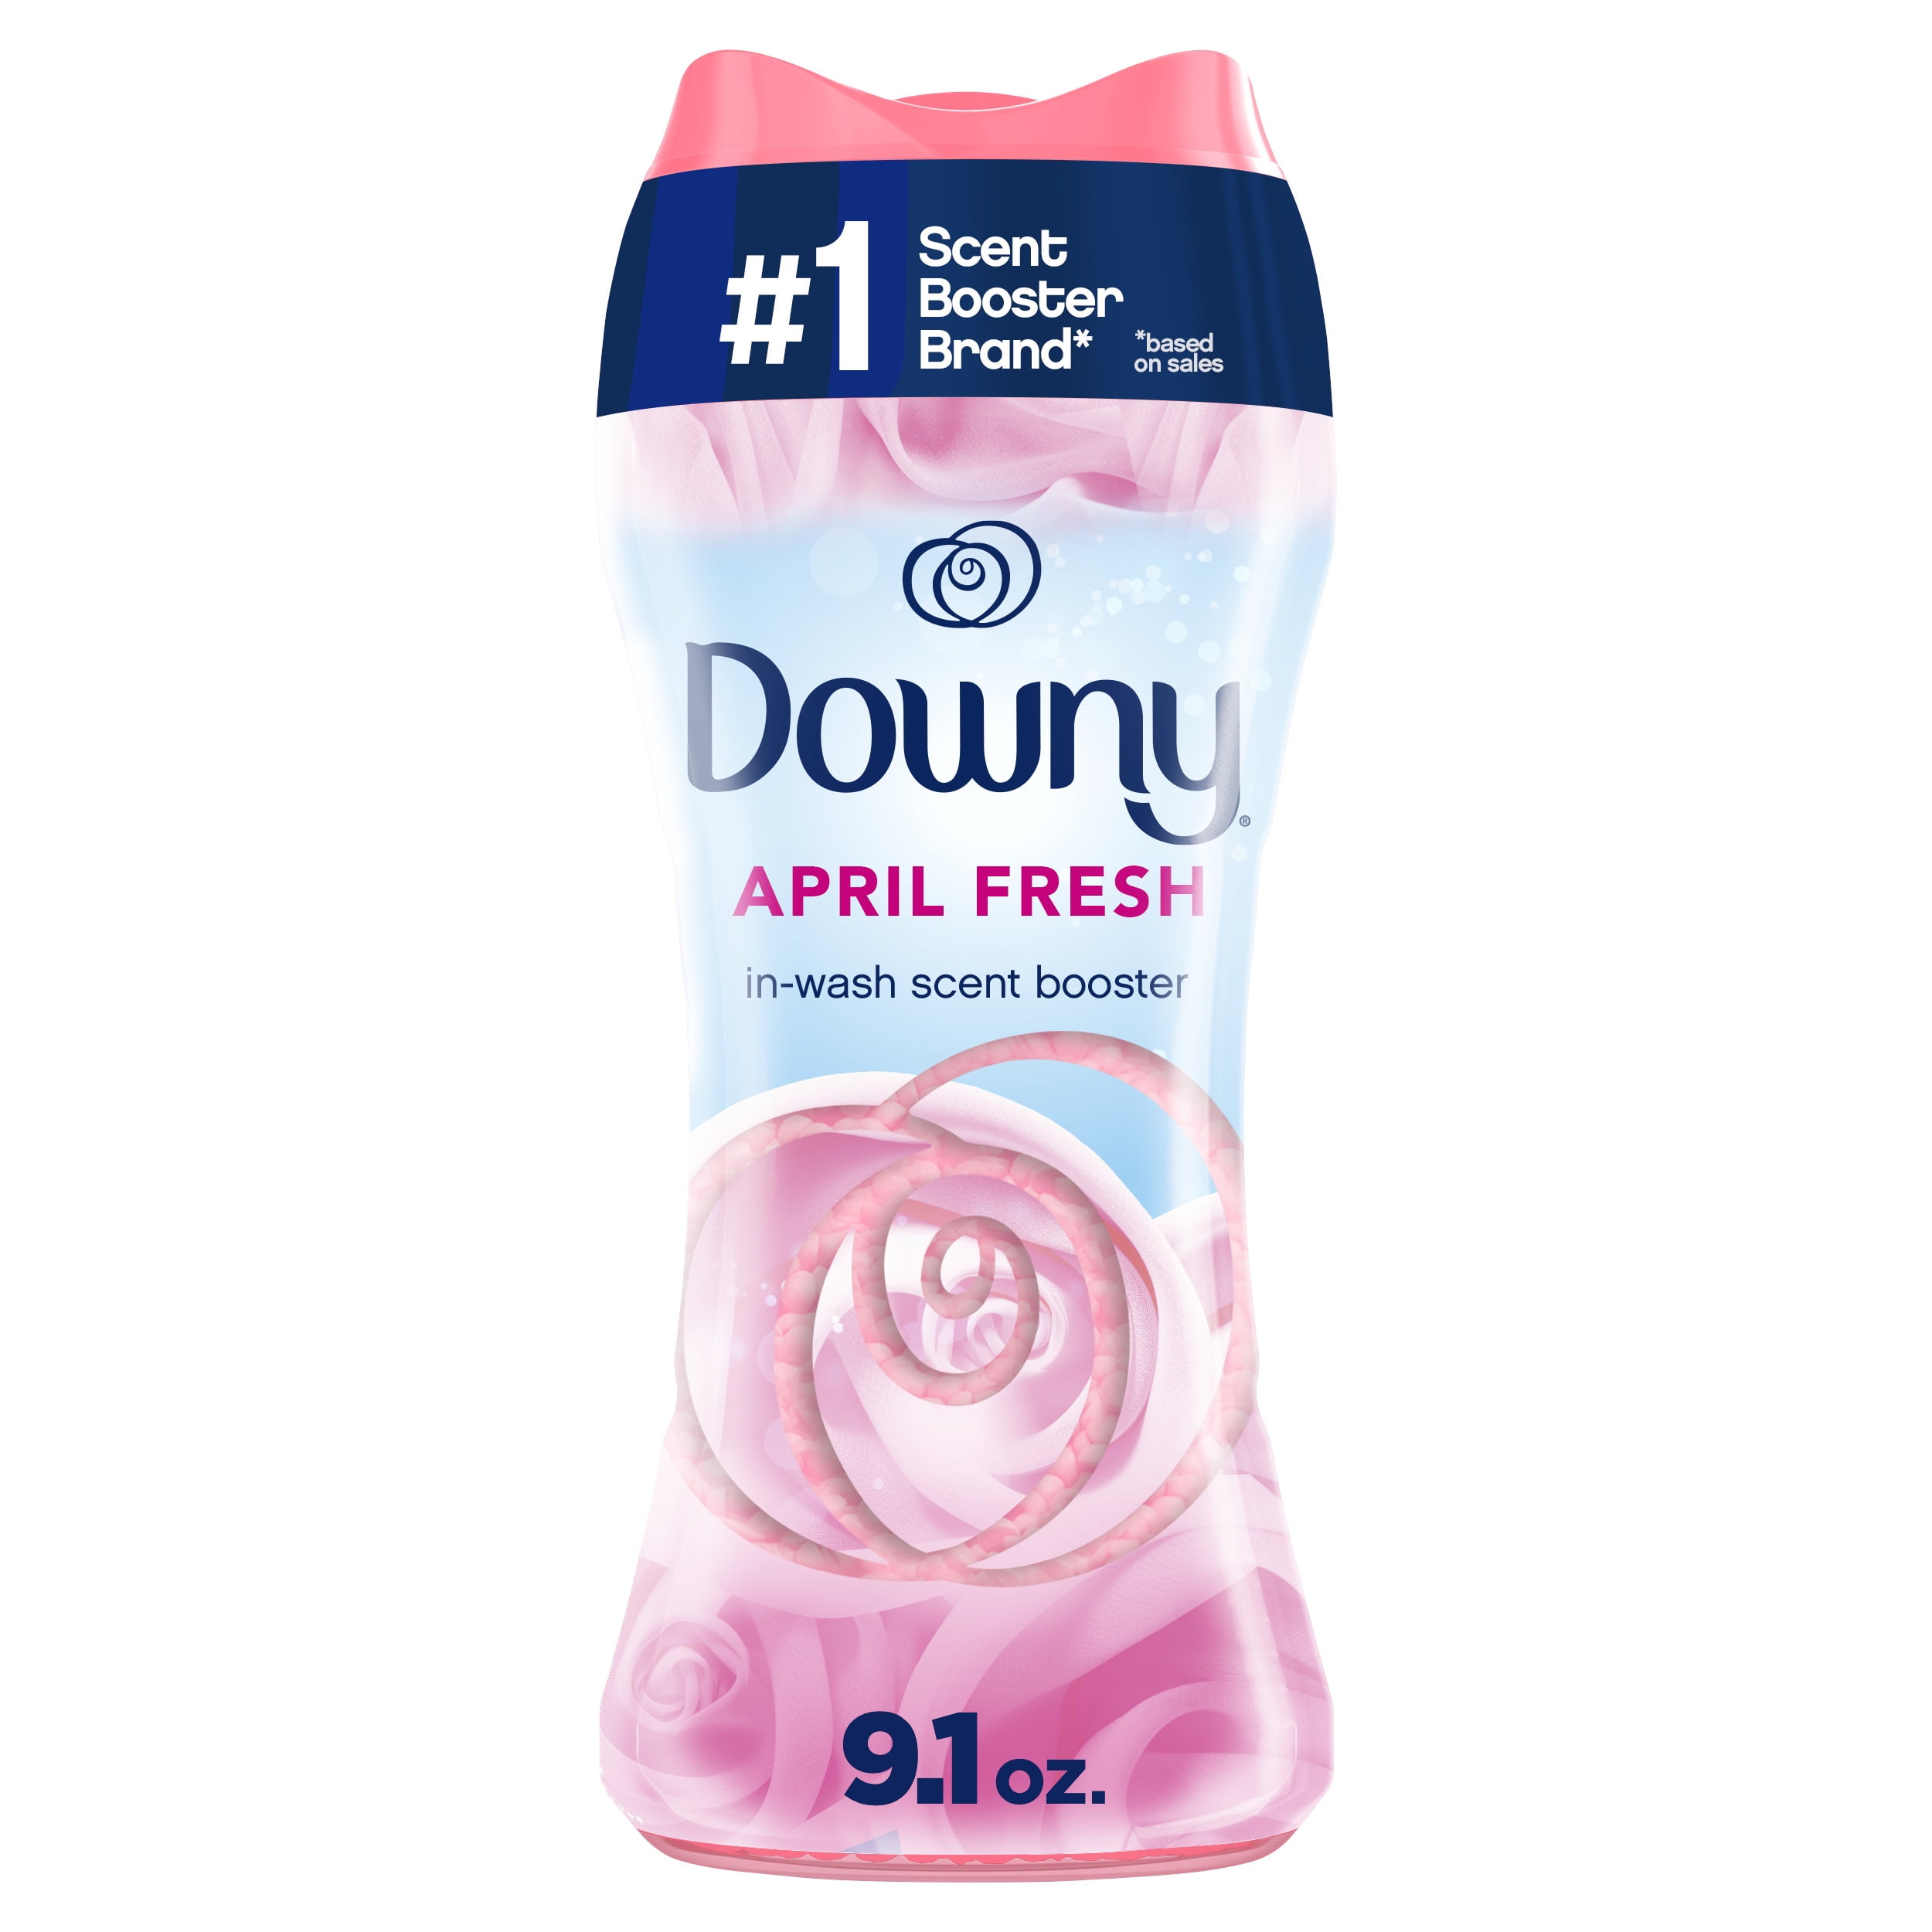 Trying the new downy beads! I absolutely love the smell! Enjoy